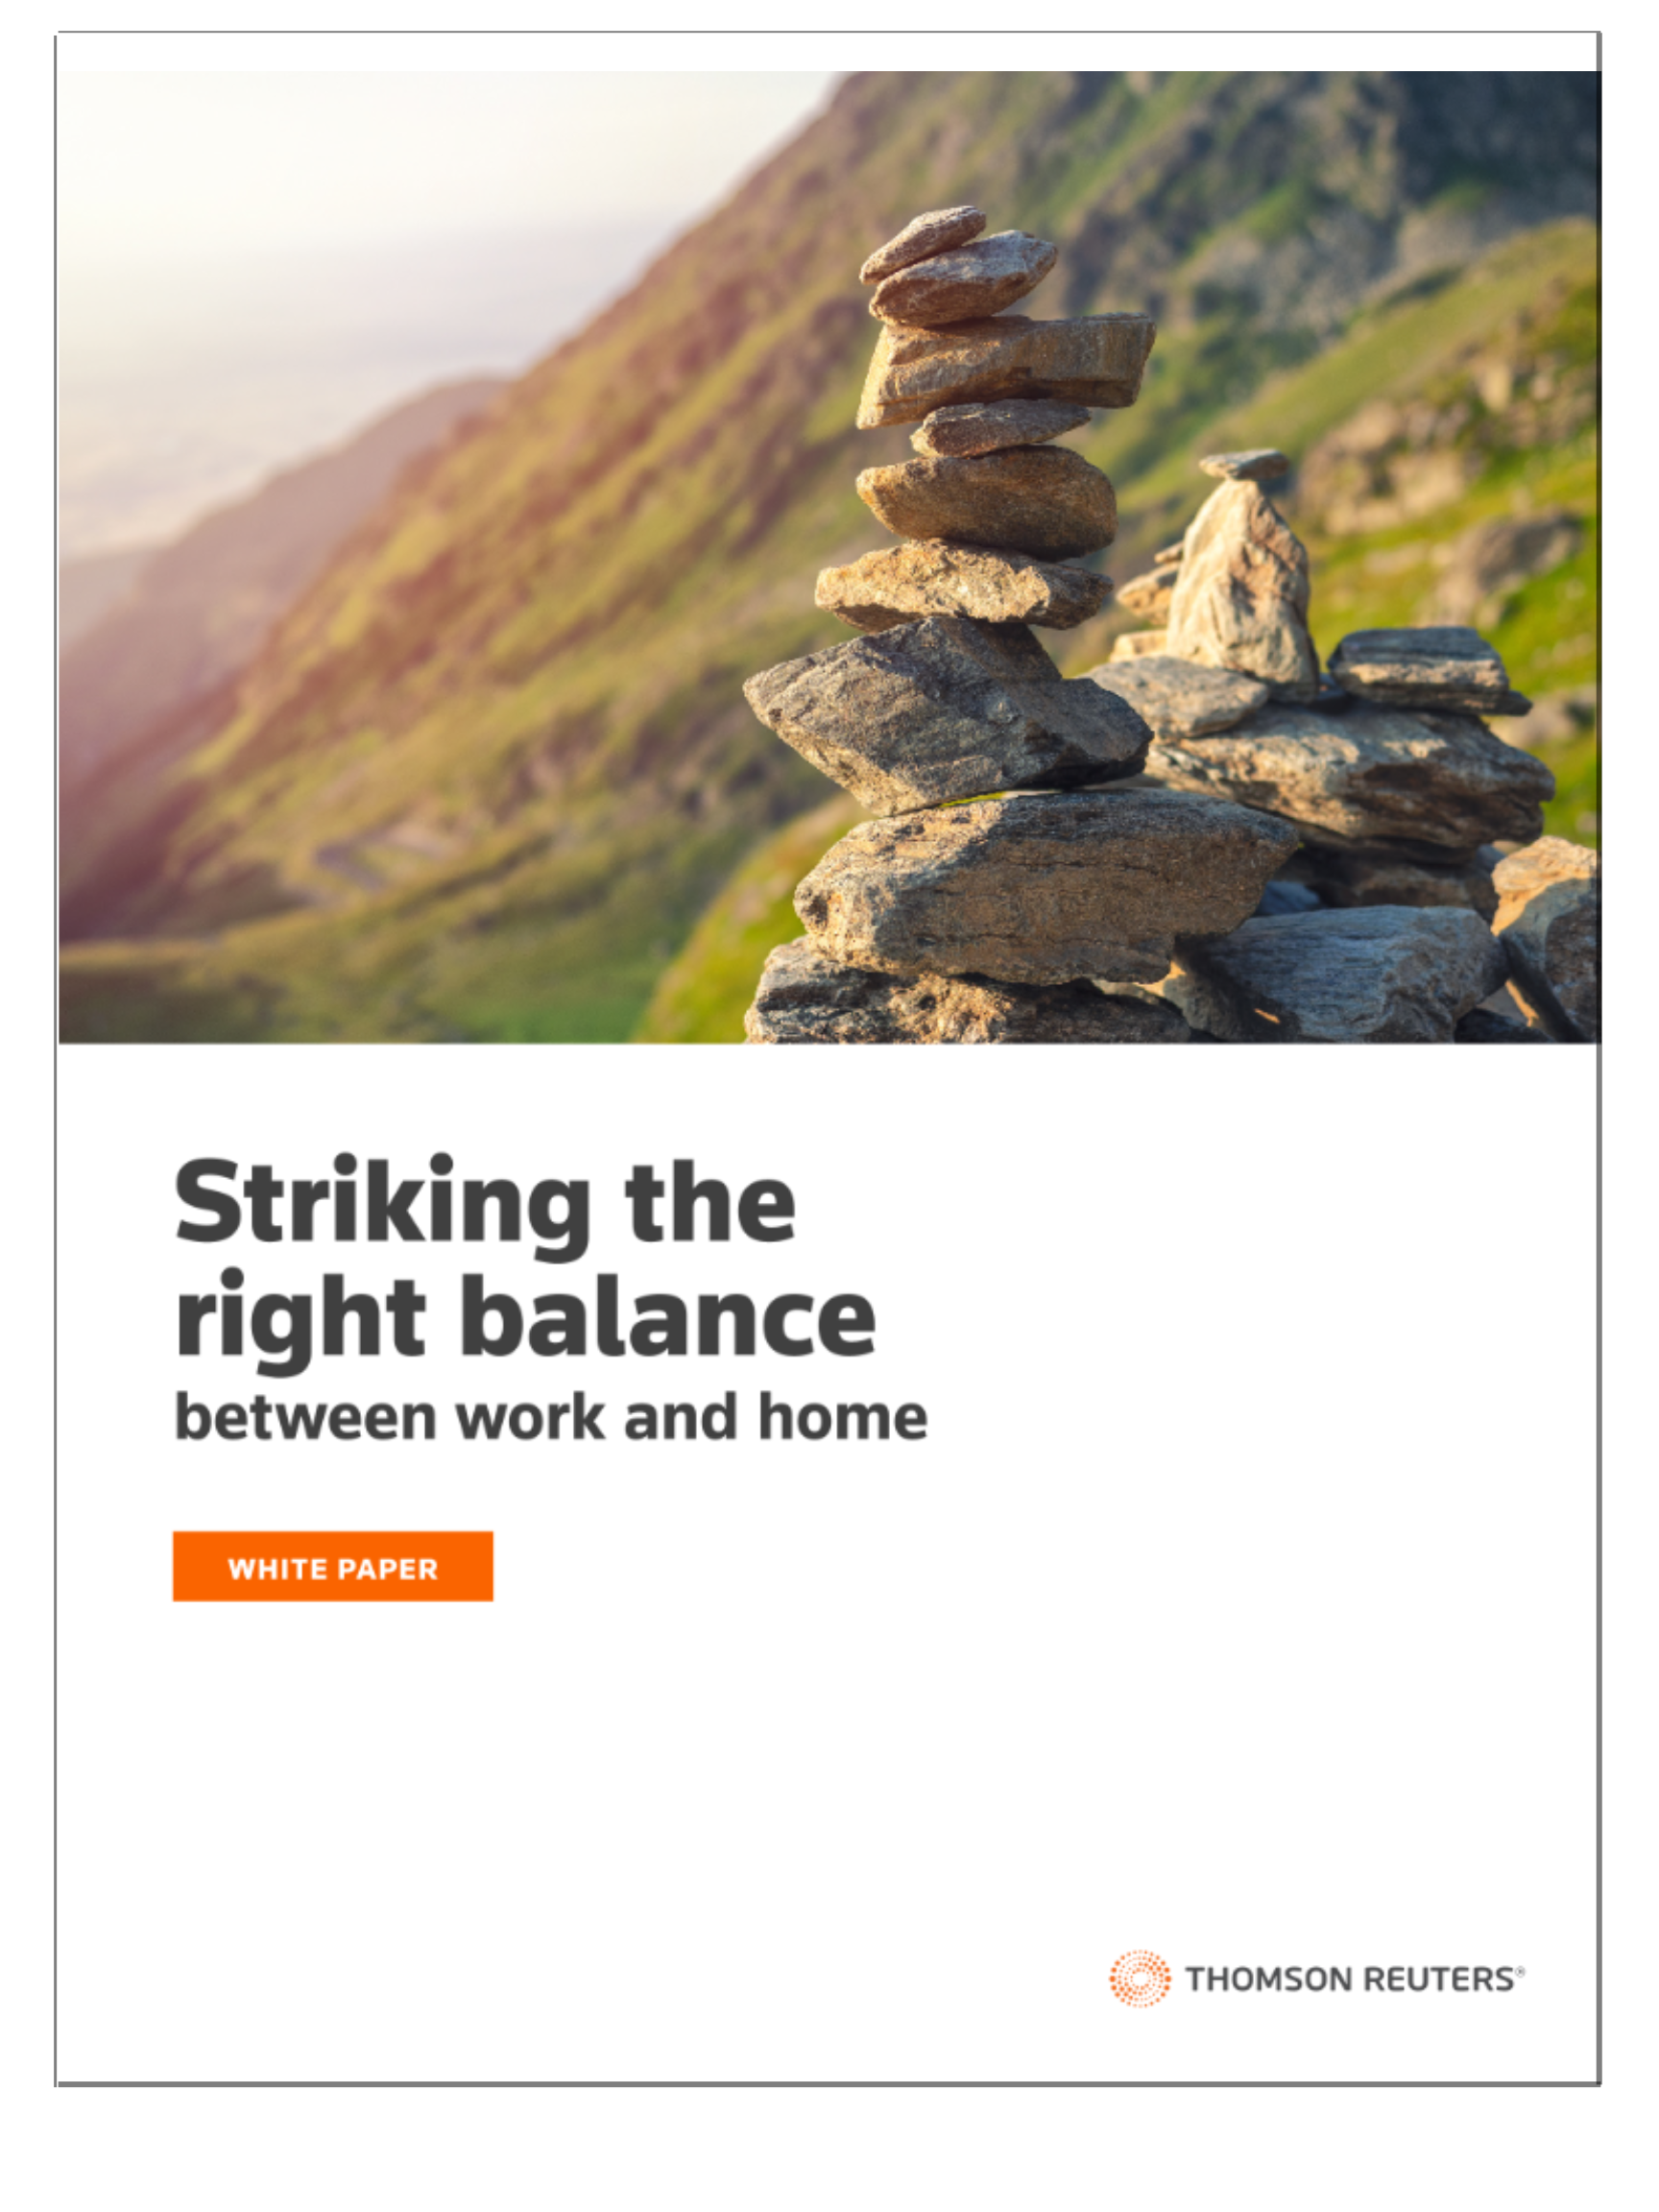 Achieve the right balance in the white paper wrapper